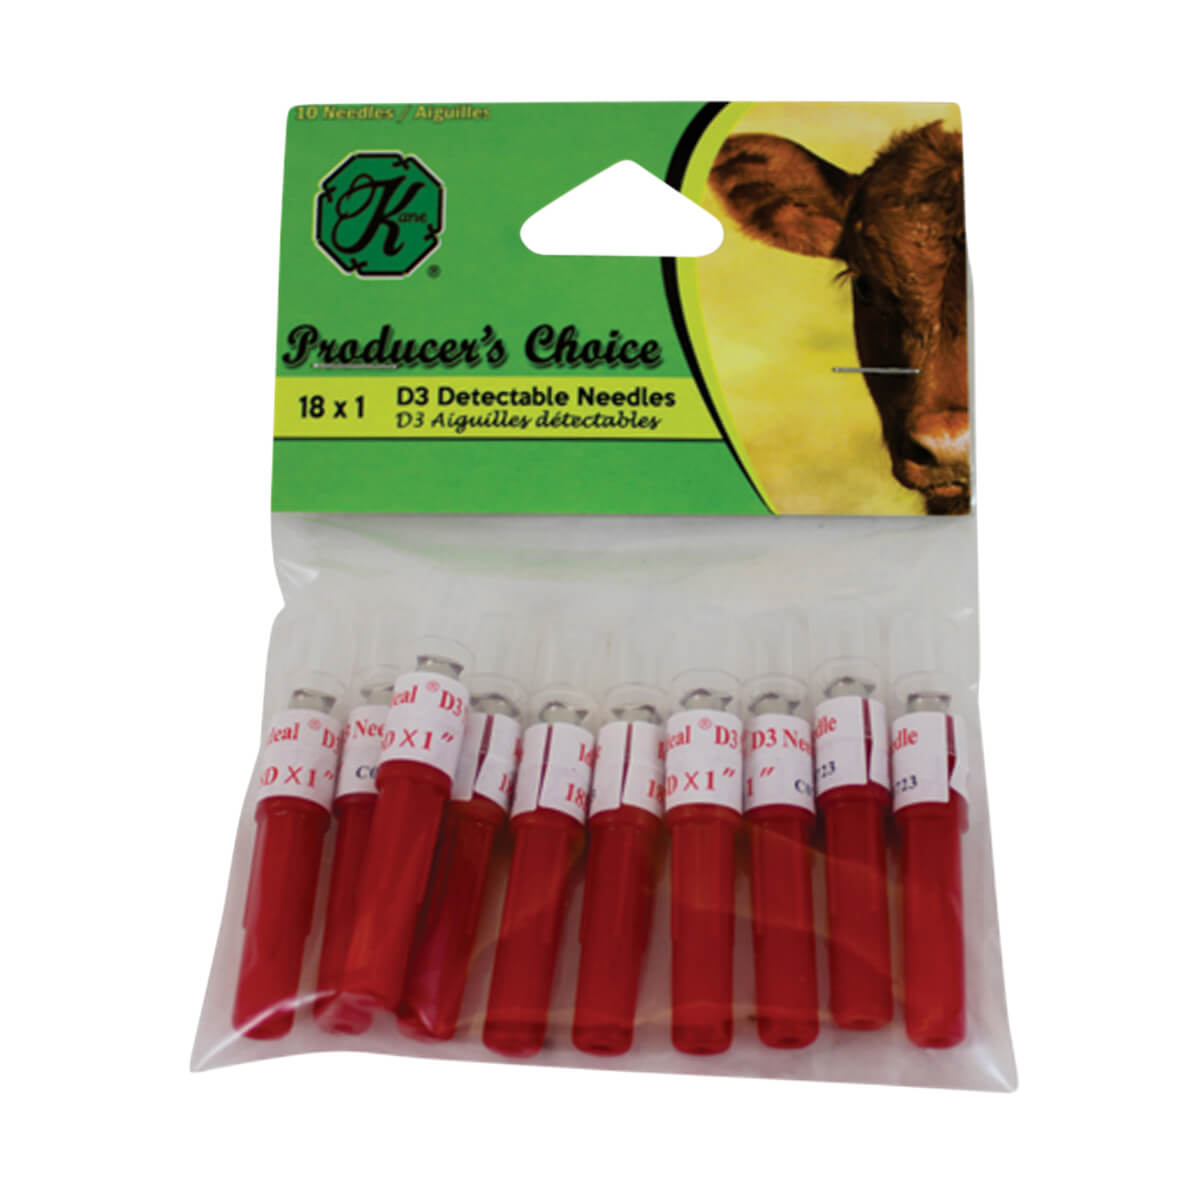 D3 Detectable Needles - 10 pack - 18 x 1-in